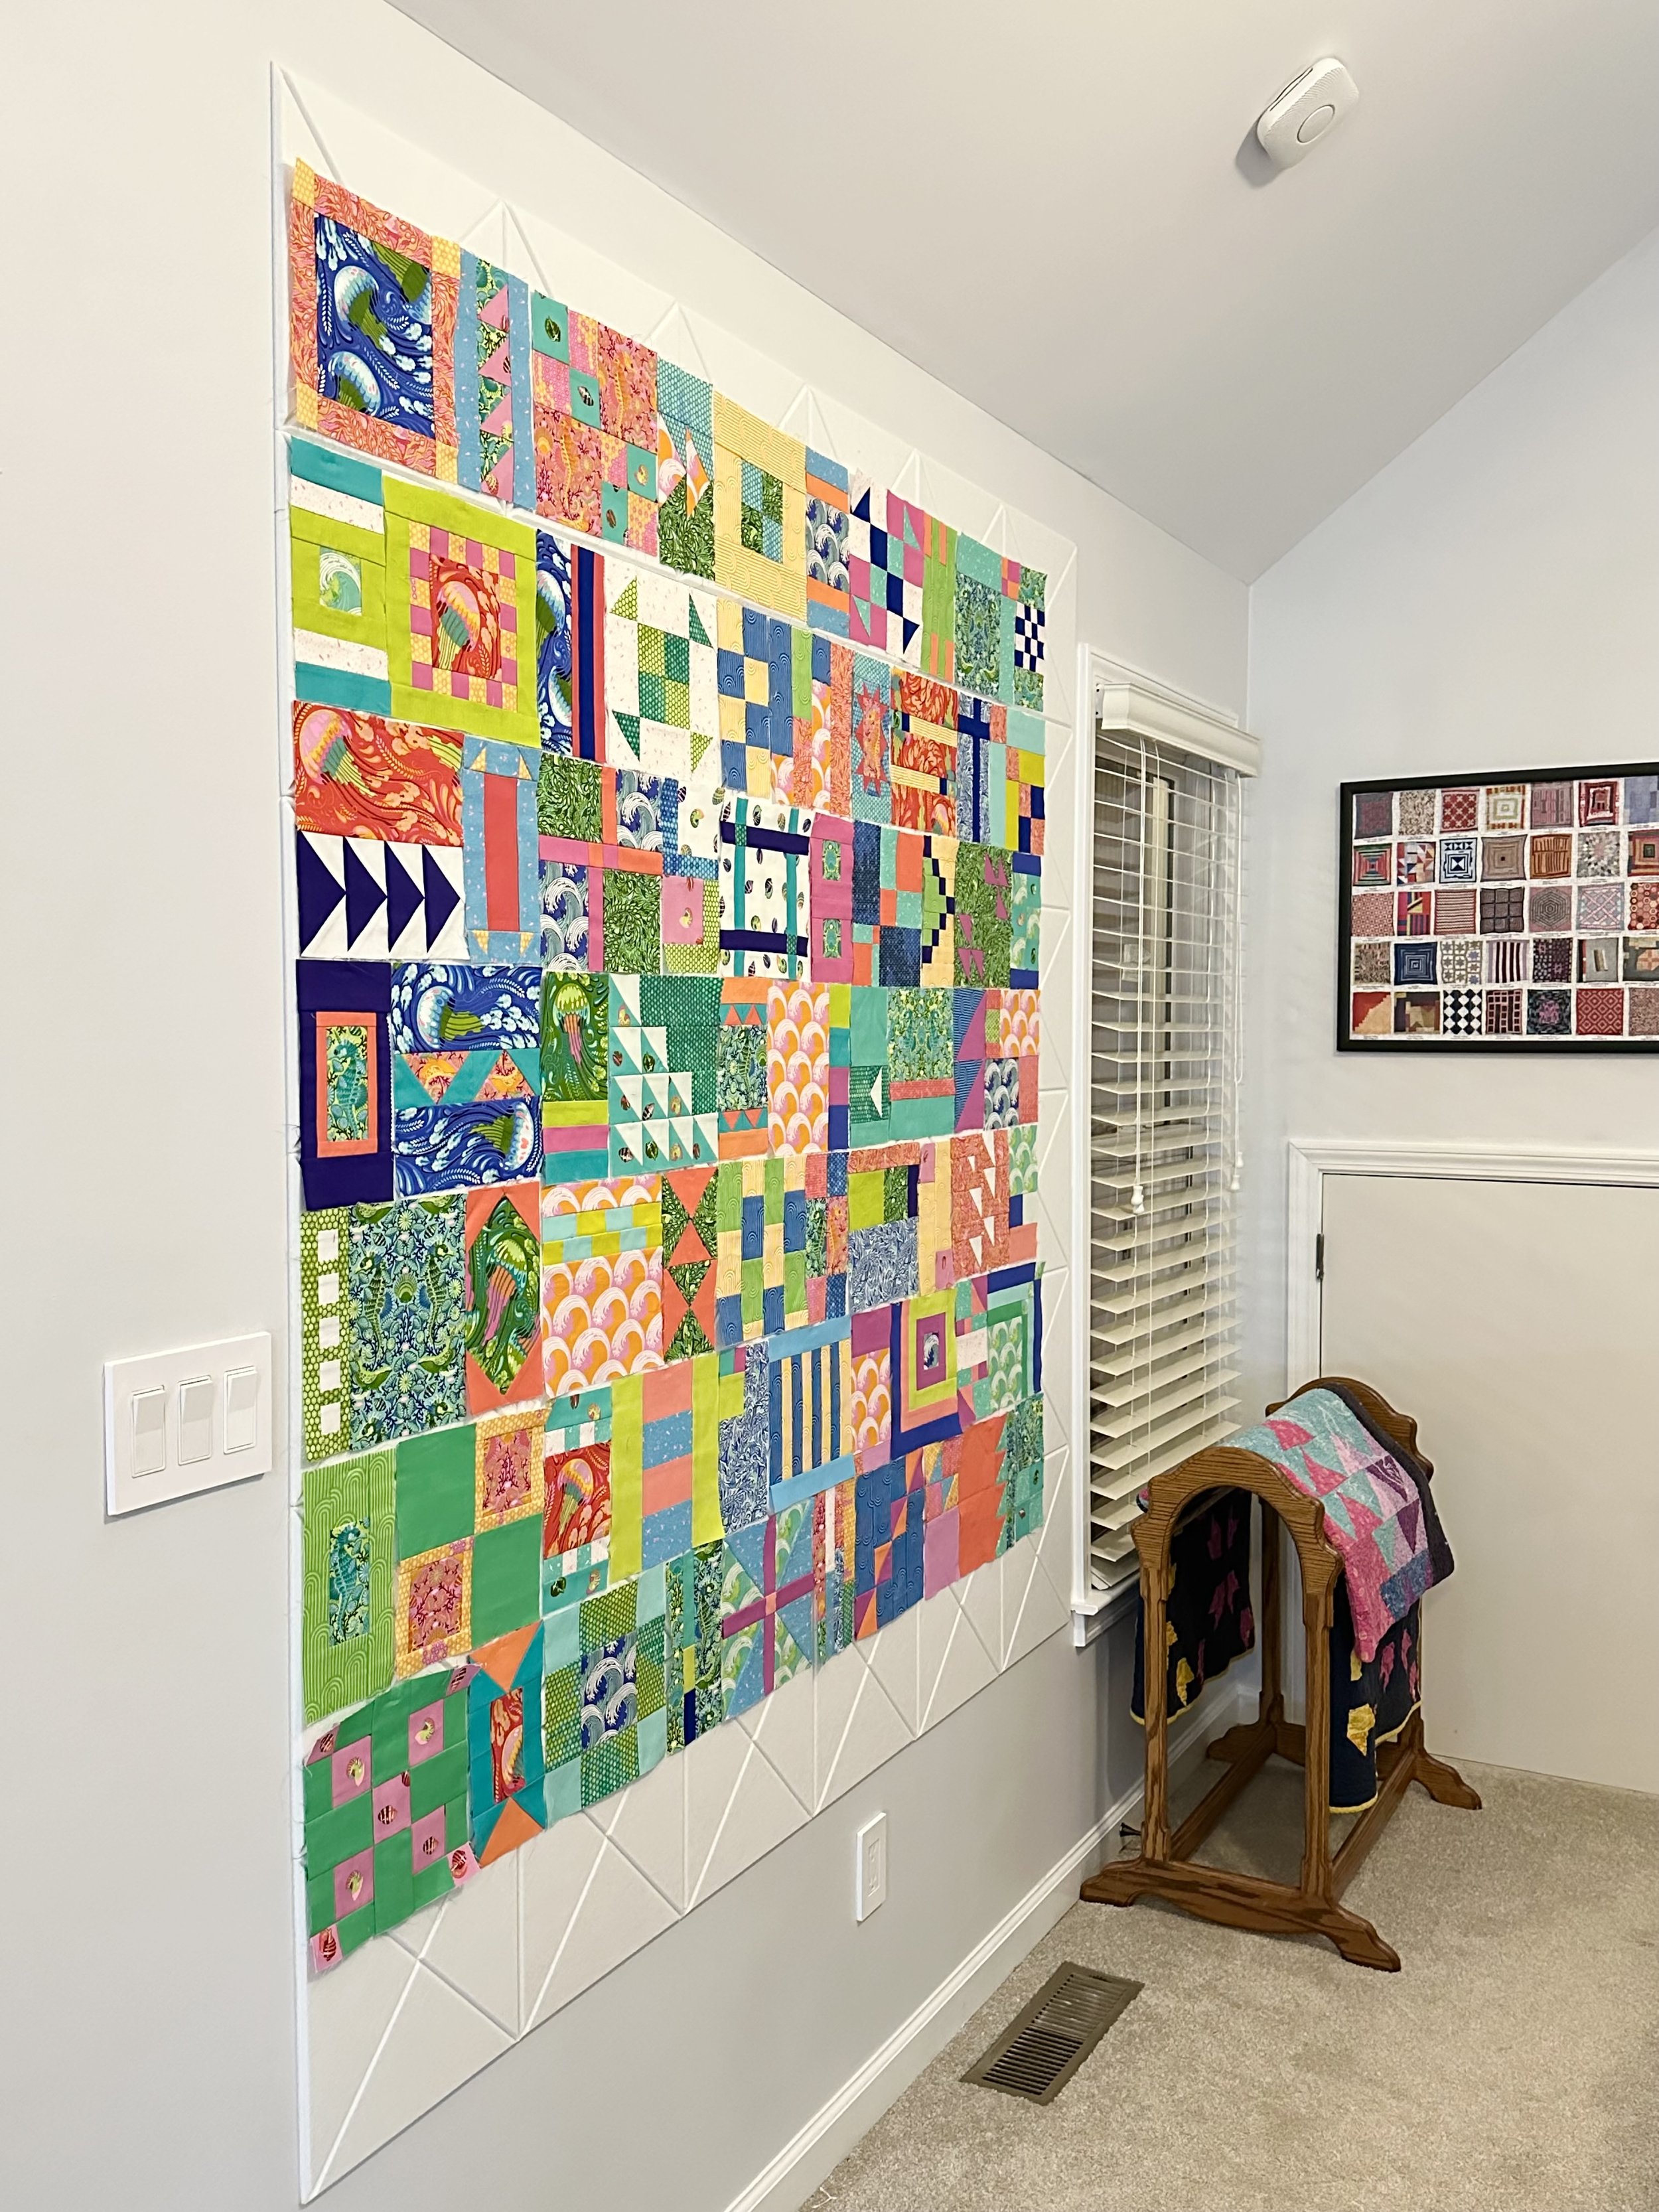 How To Make A Quilting Design Wall